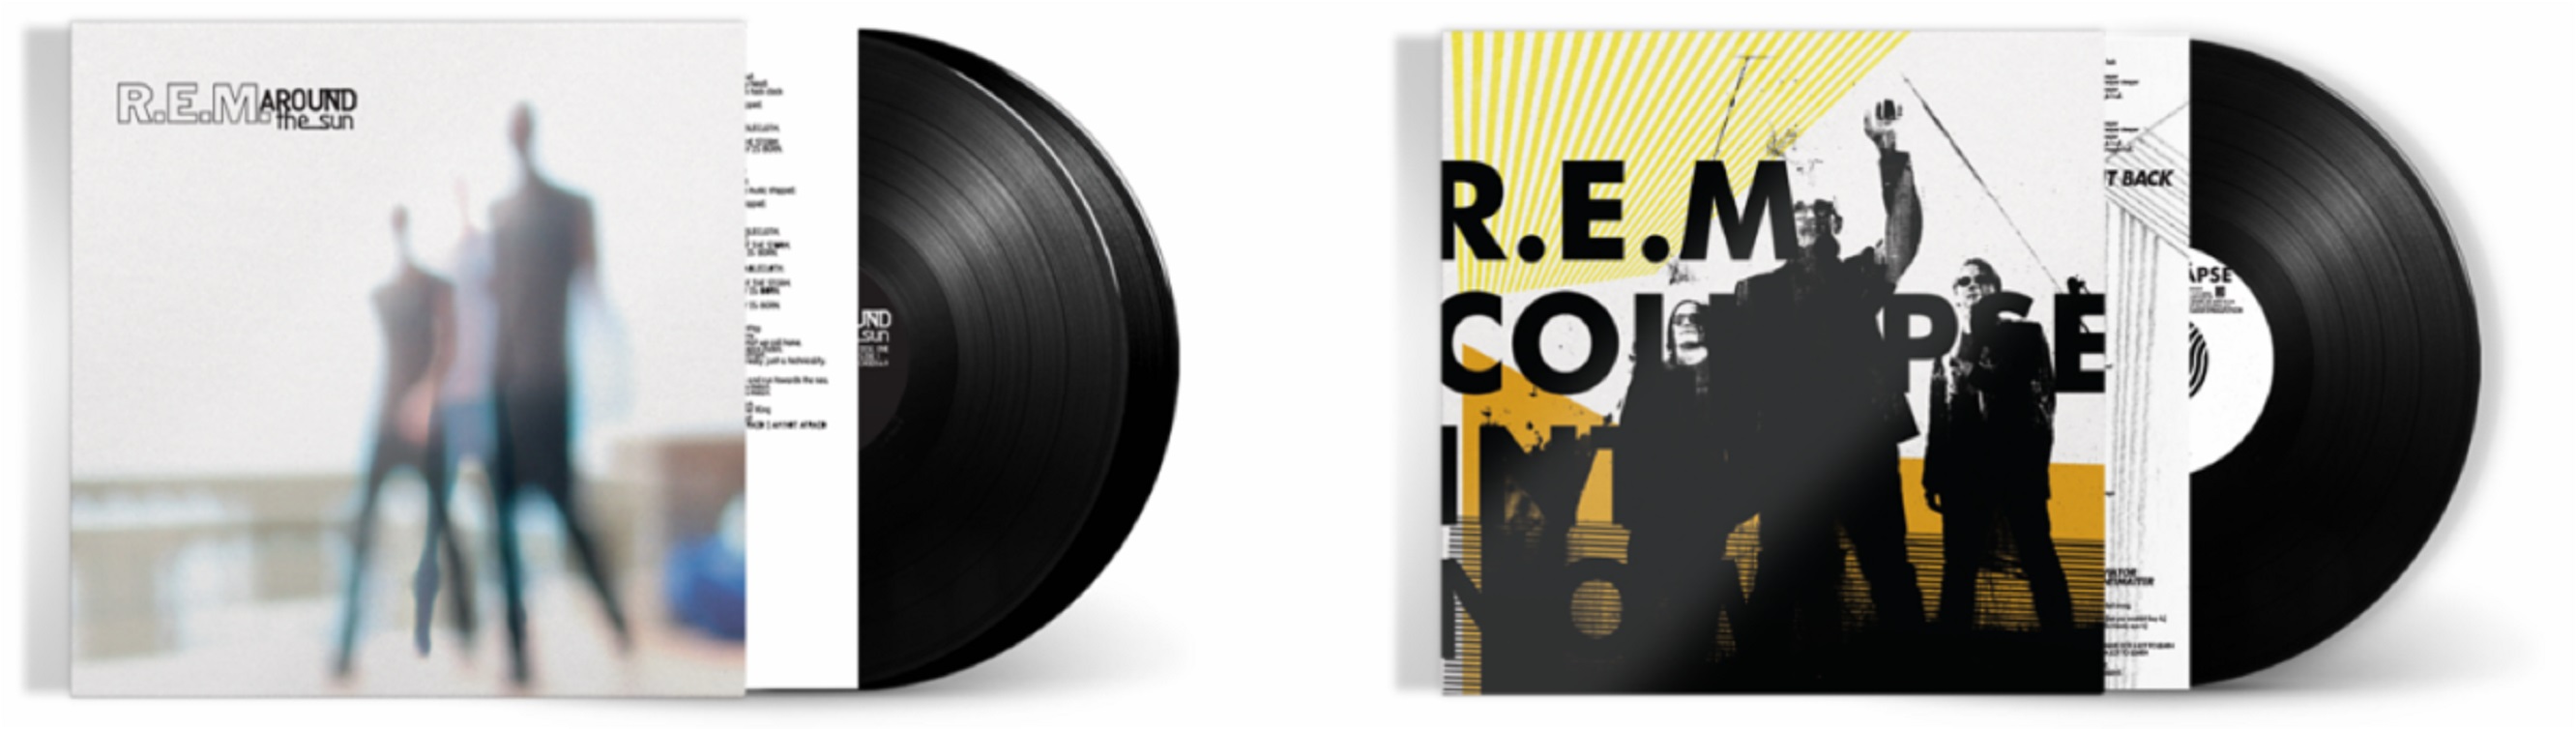 R.E.M.’s long out-of-print albums 'Around the Sun' and 'Collapse into Now' return to vinyl July 14